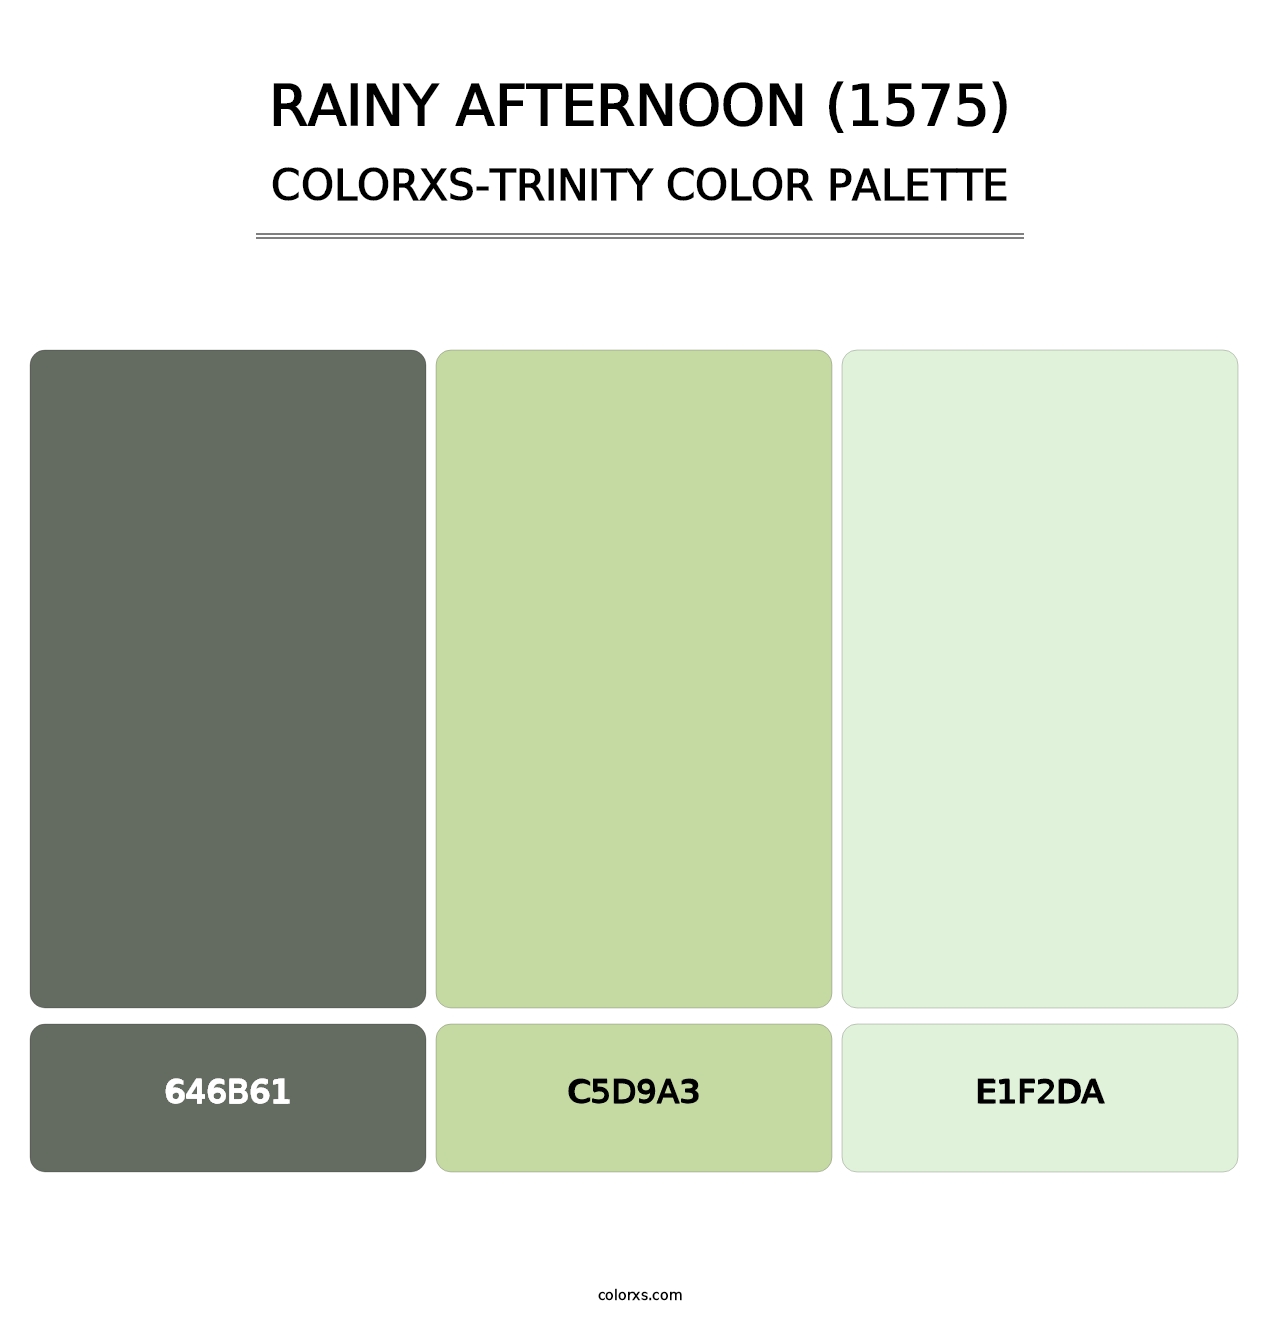 Rainy Afternoon (1575) - Colorxs Trinity Palette